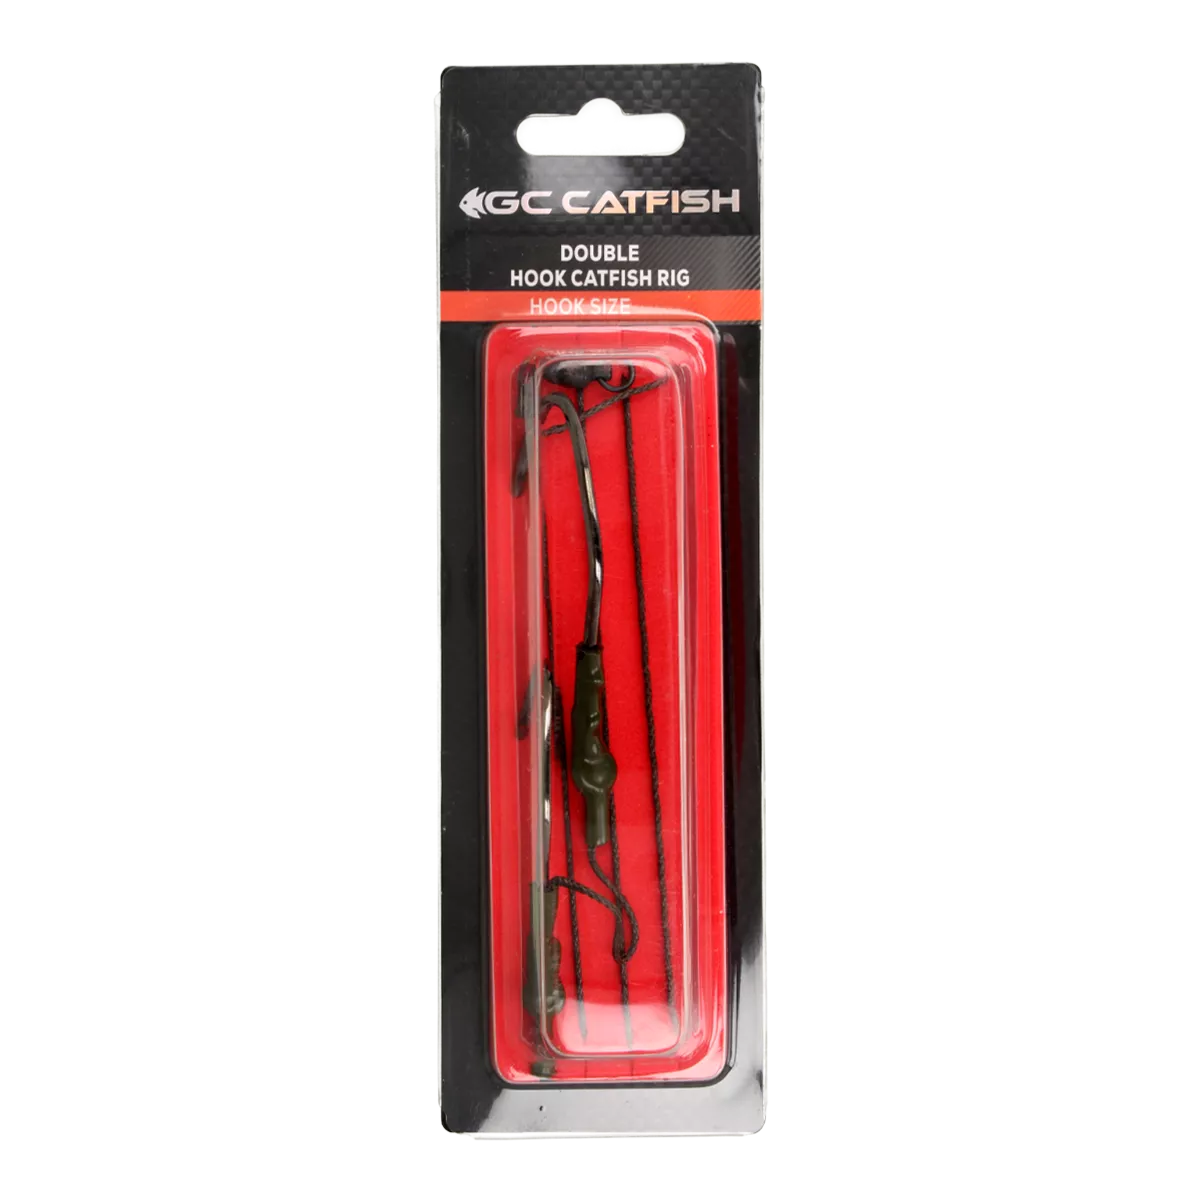 Golden Catch Catfish Rig Double Hook: check it out on the official